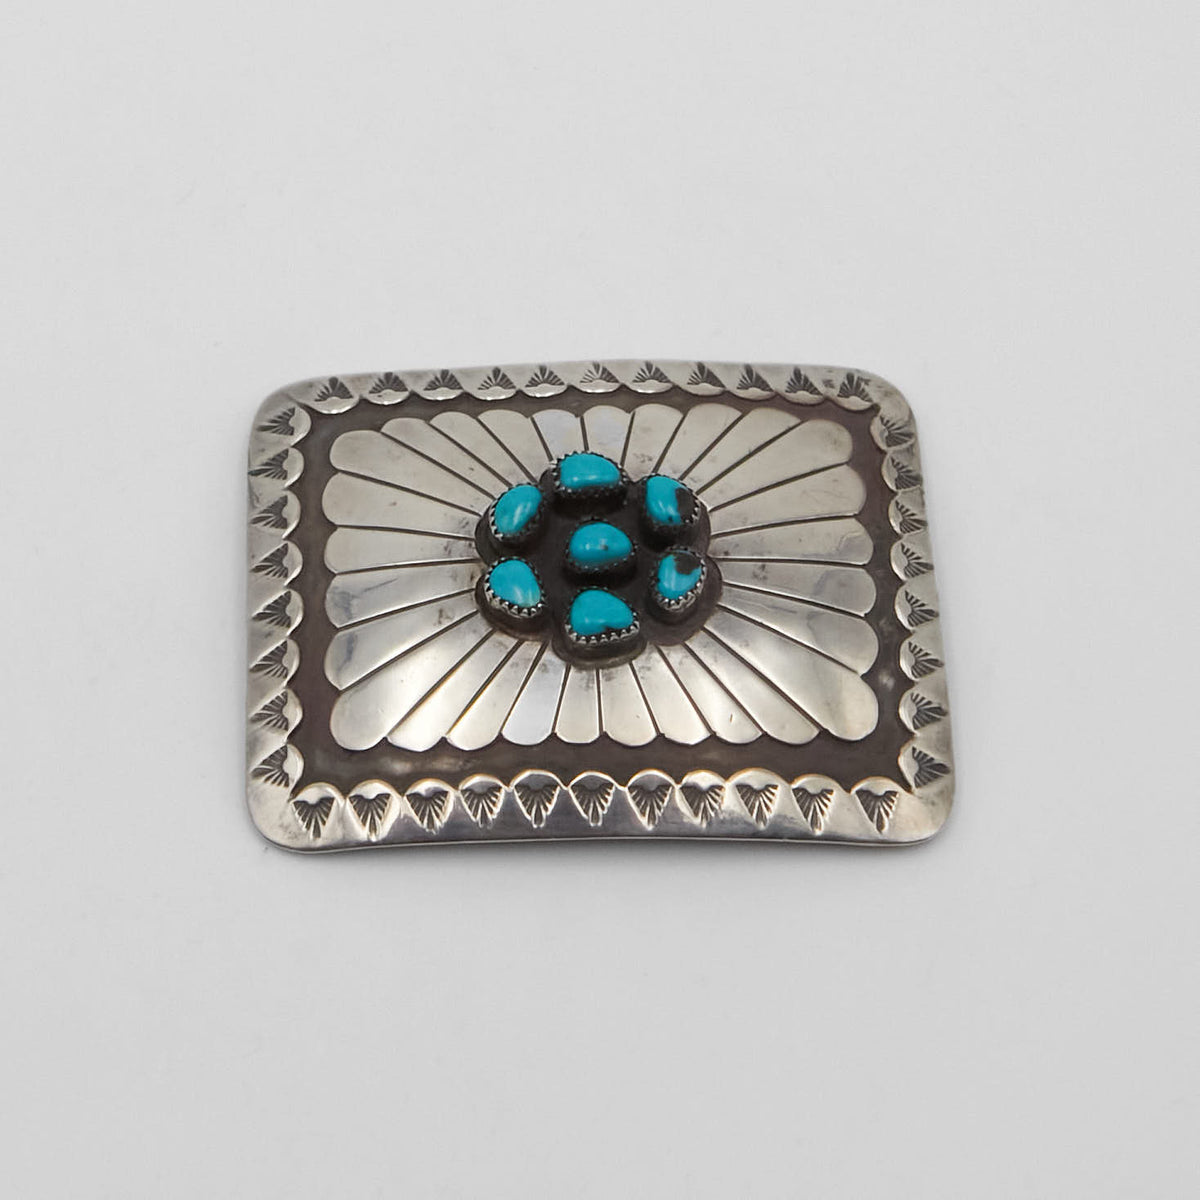 Vintage Jewelry Turquoise Square Belt Buckle